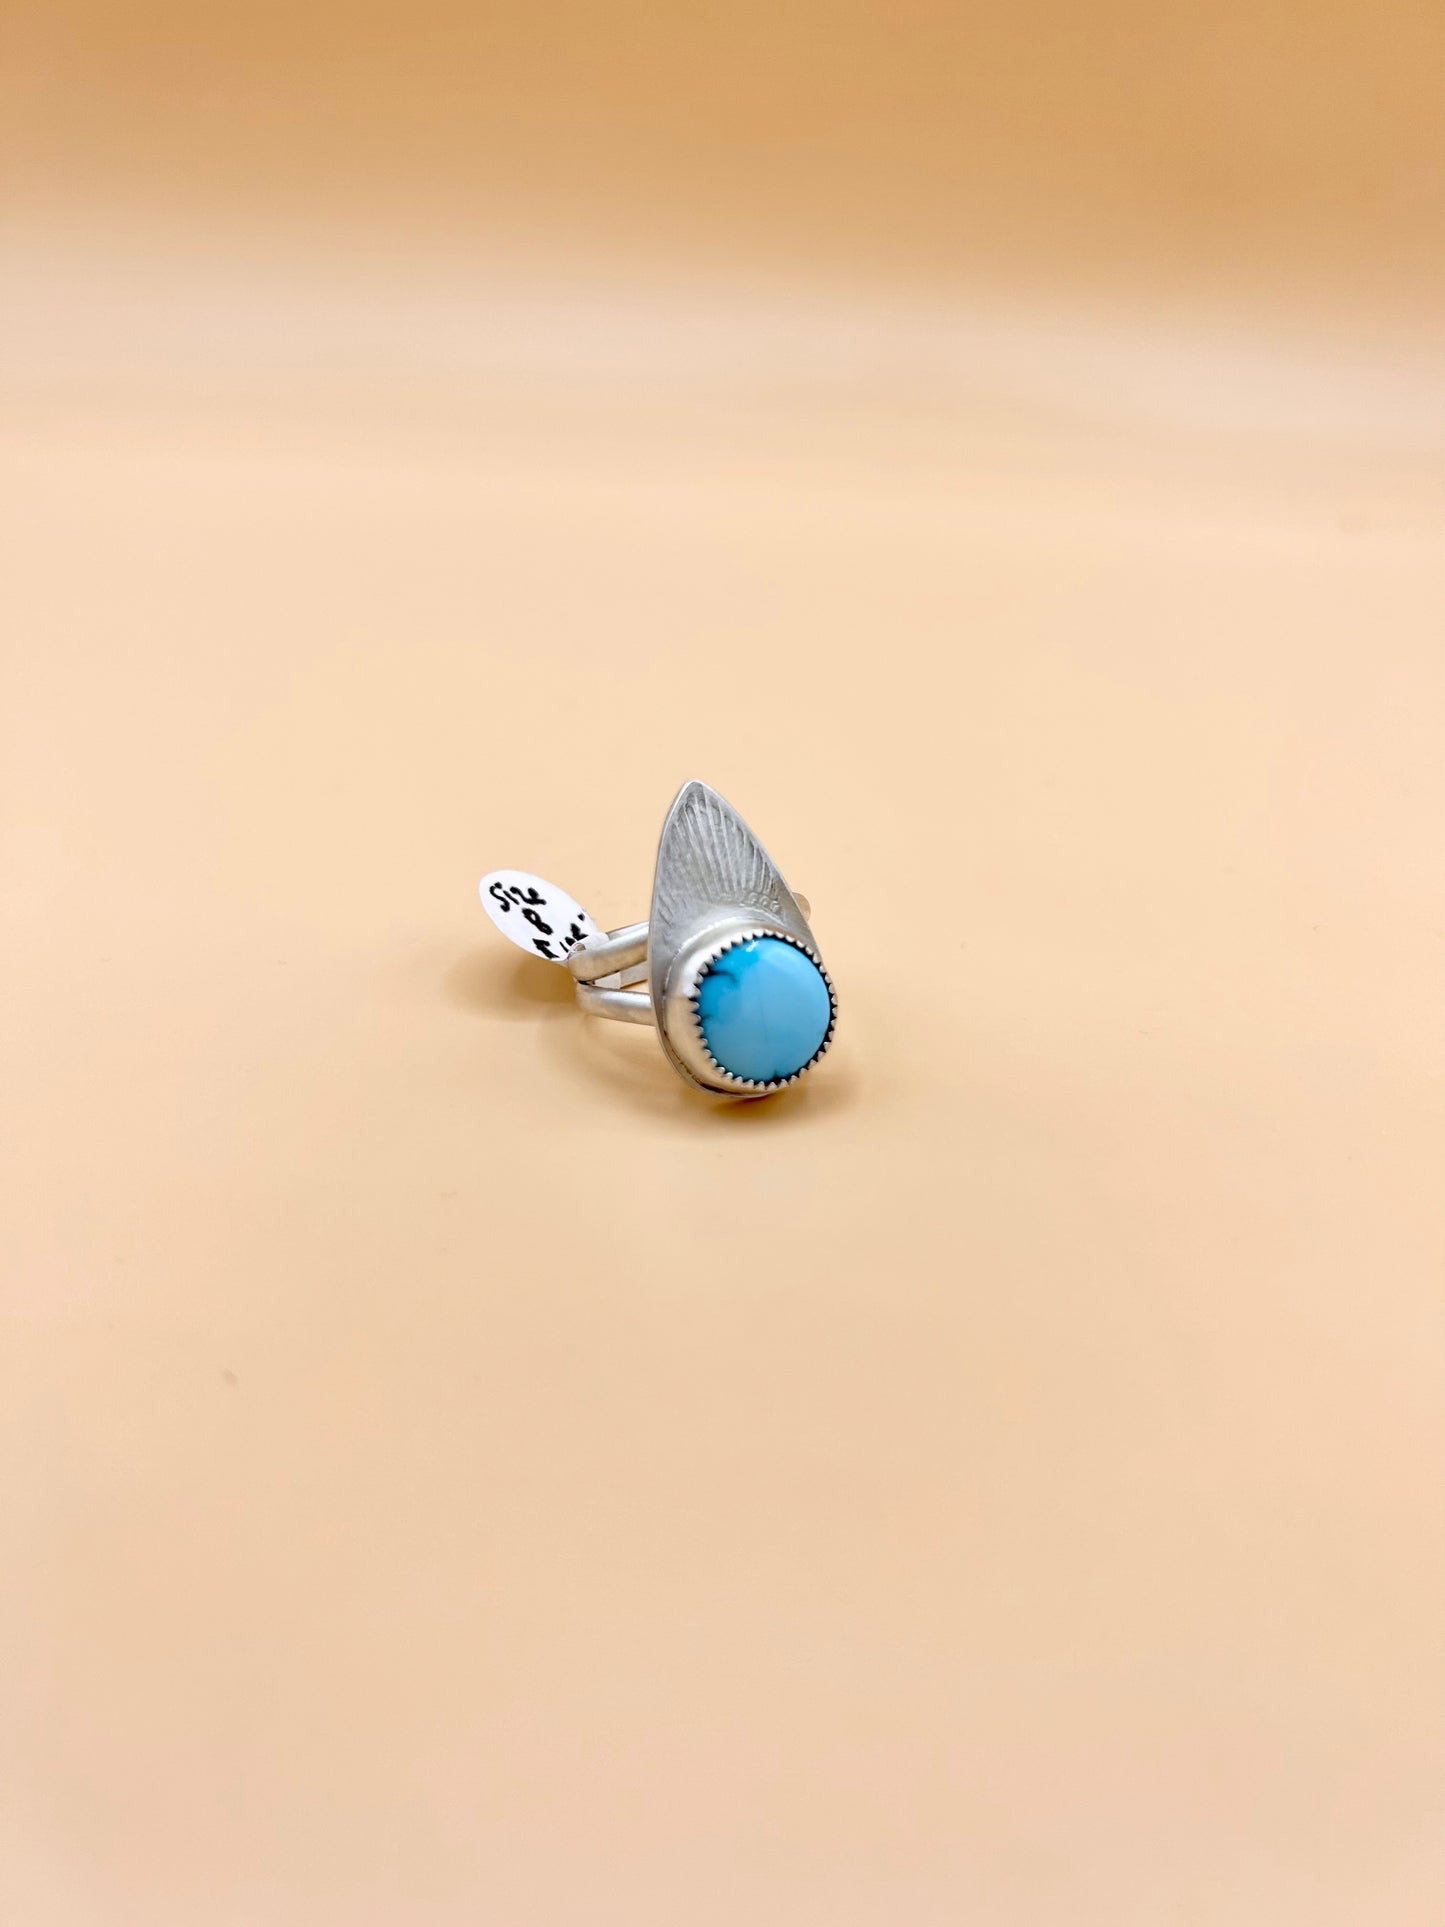 Turquoise and Sterling Silver Ring (size 8)